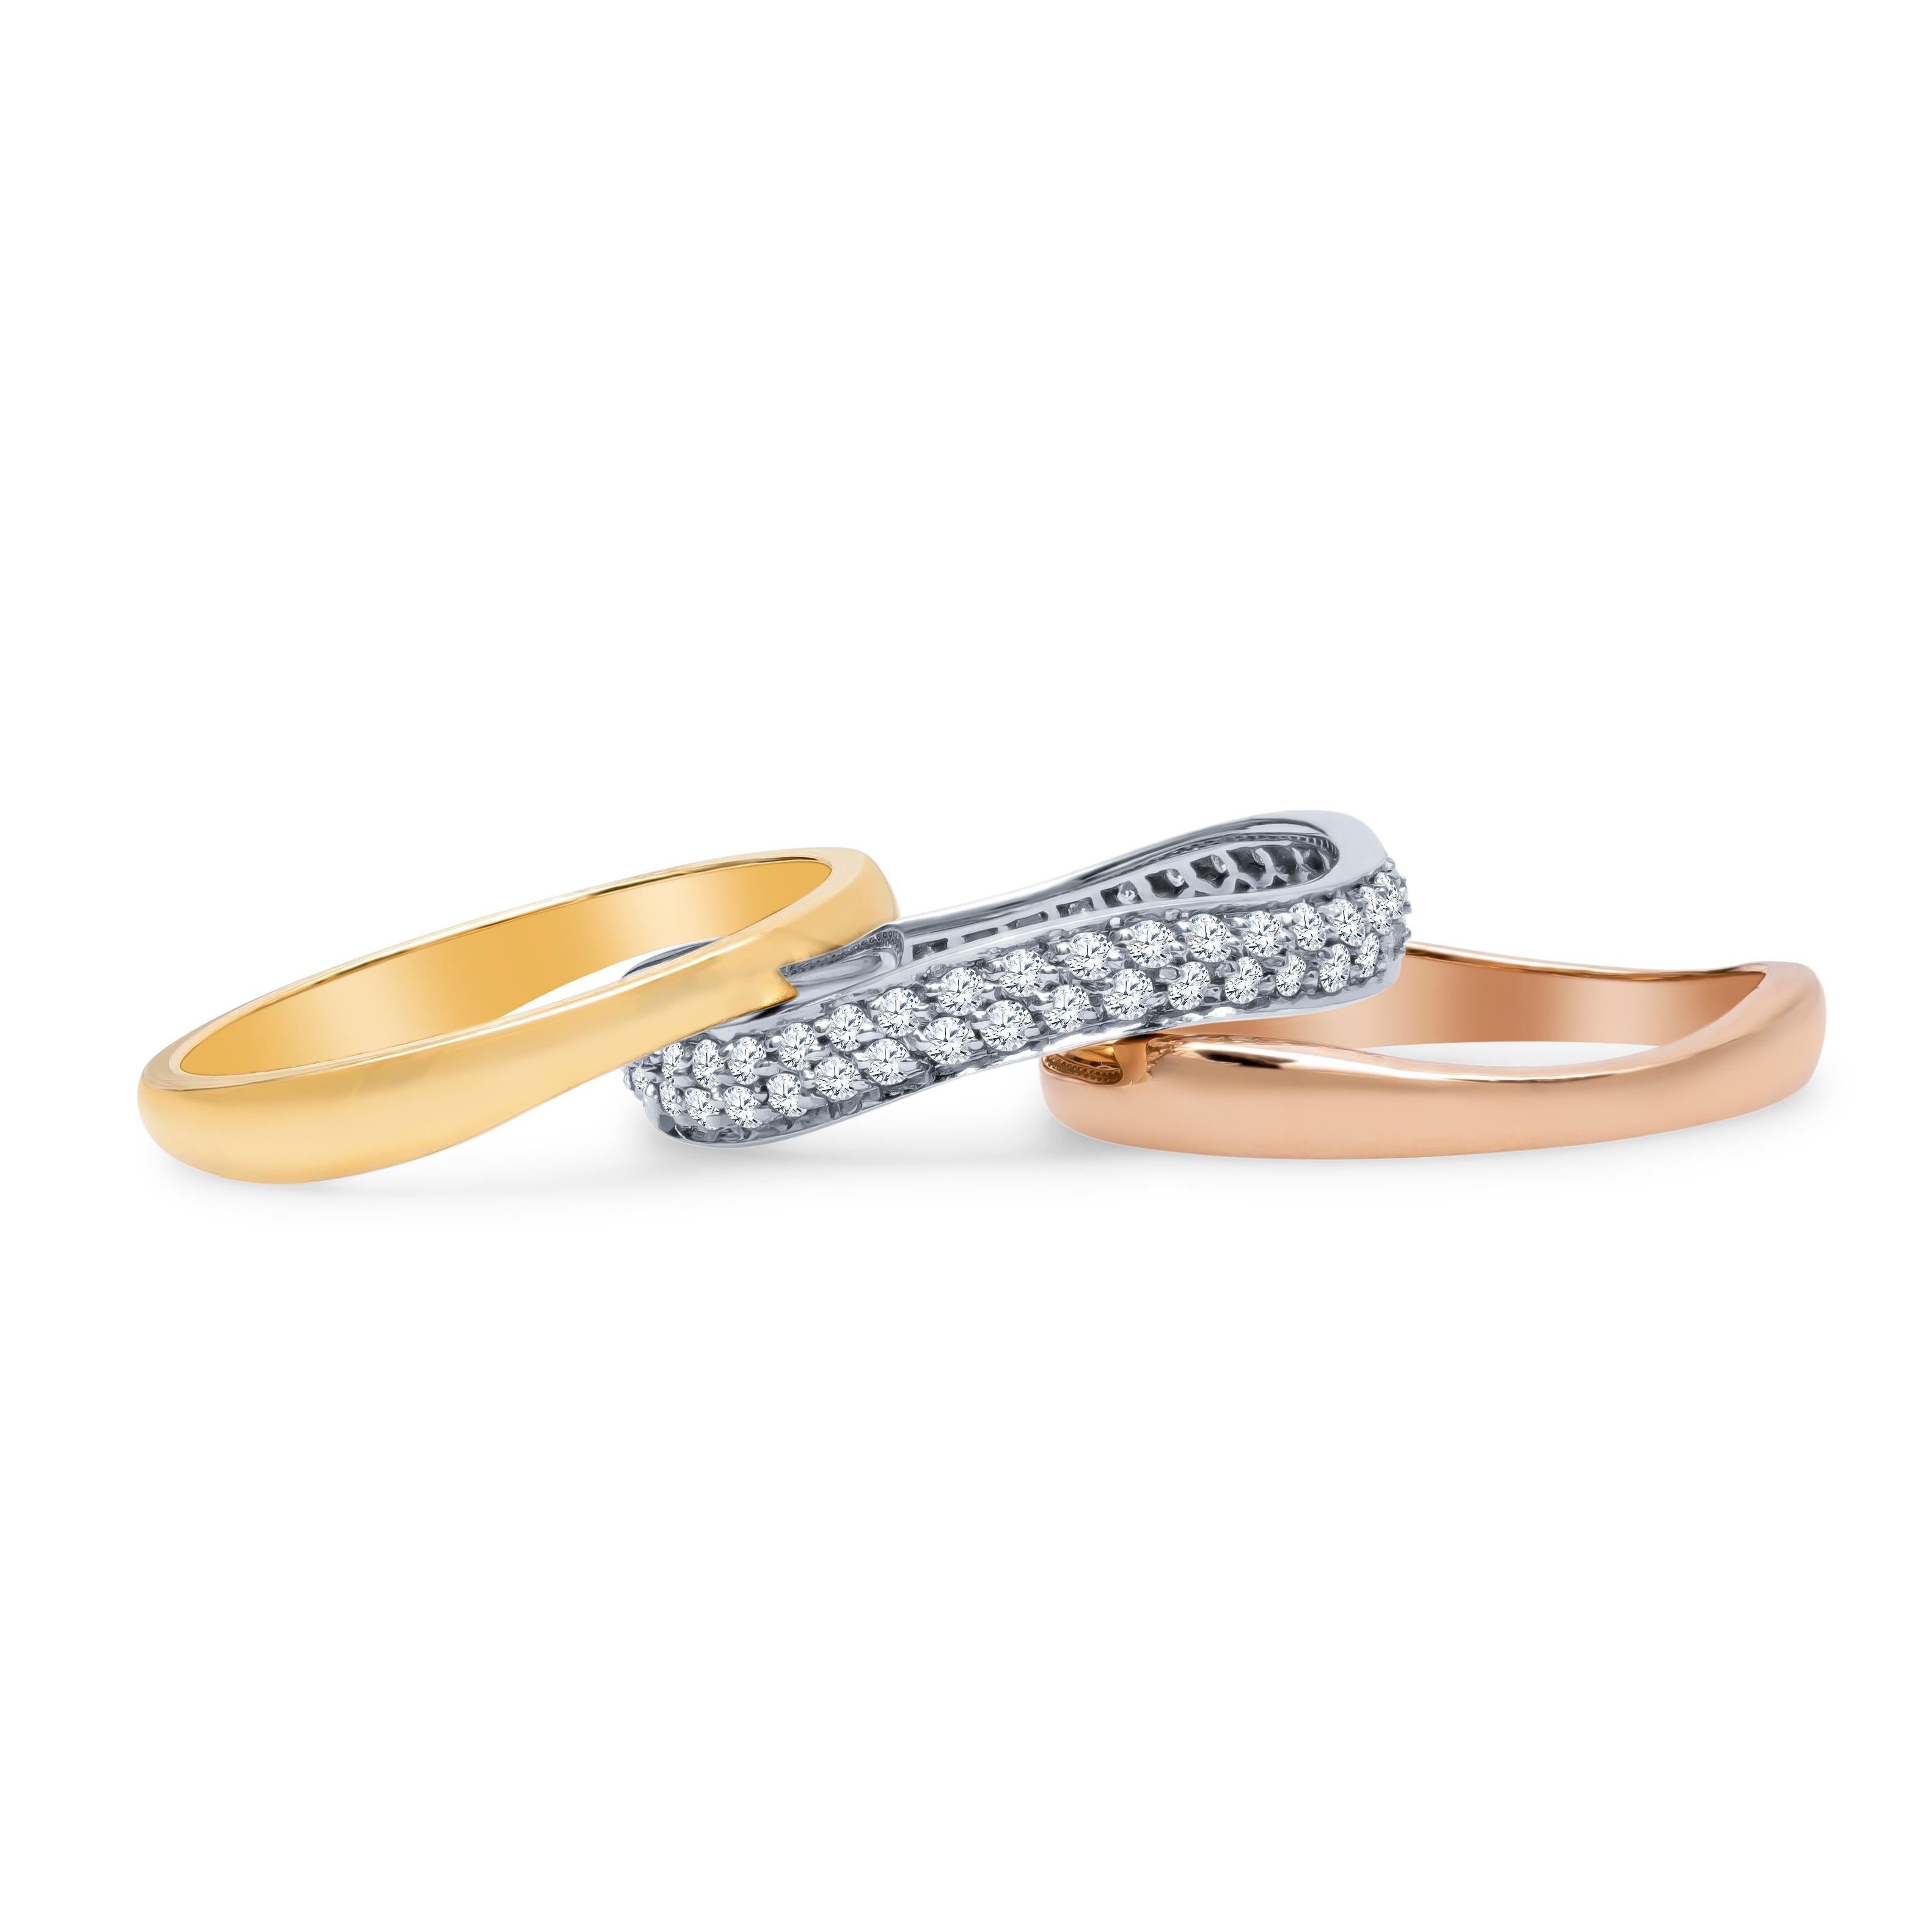 Brand: Cartier 

Style: Trinity 3pc Ring

Stones: Pave Diamonds

Metal:  18k Tri-Color Gold

Size: 55 - 7.25

Year: 1996

Hallmarked: Cartier 750 serial number E576**

